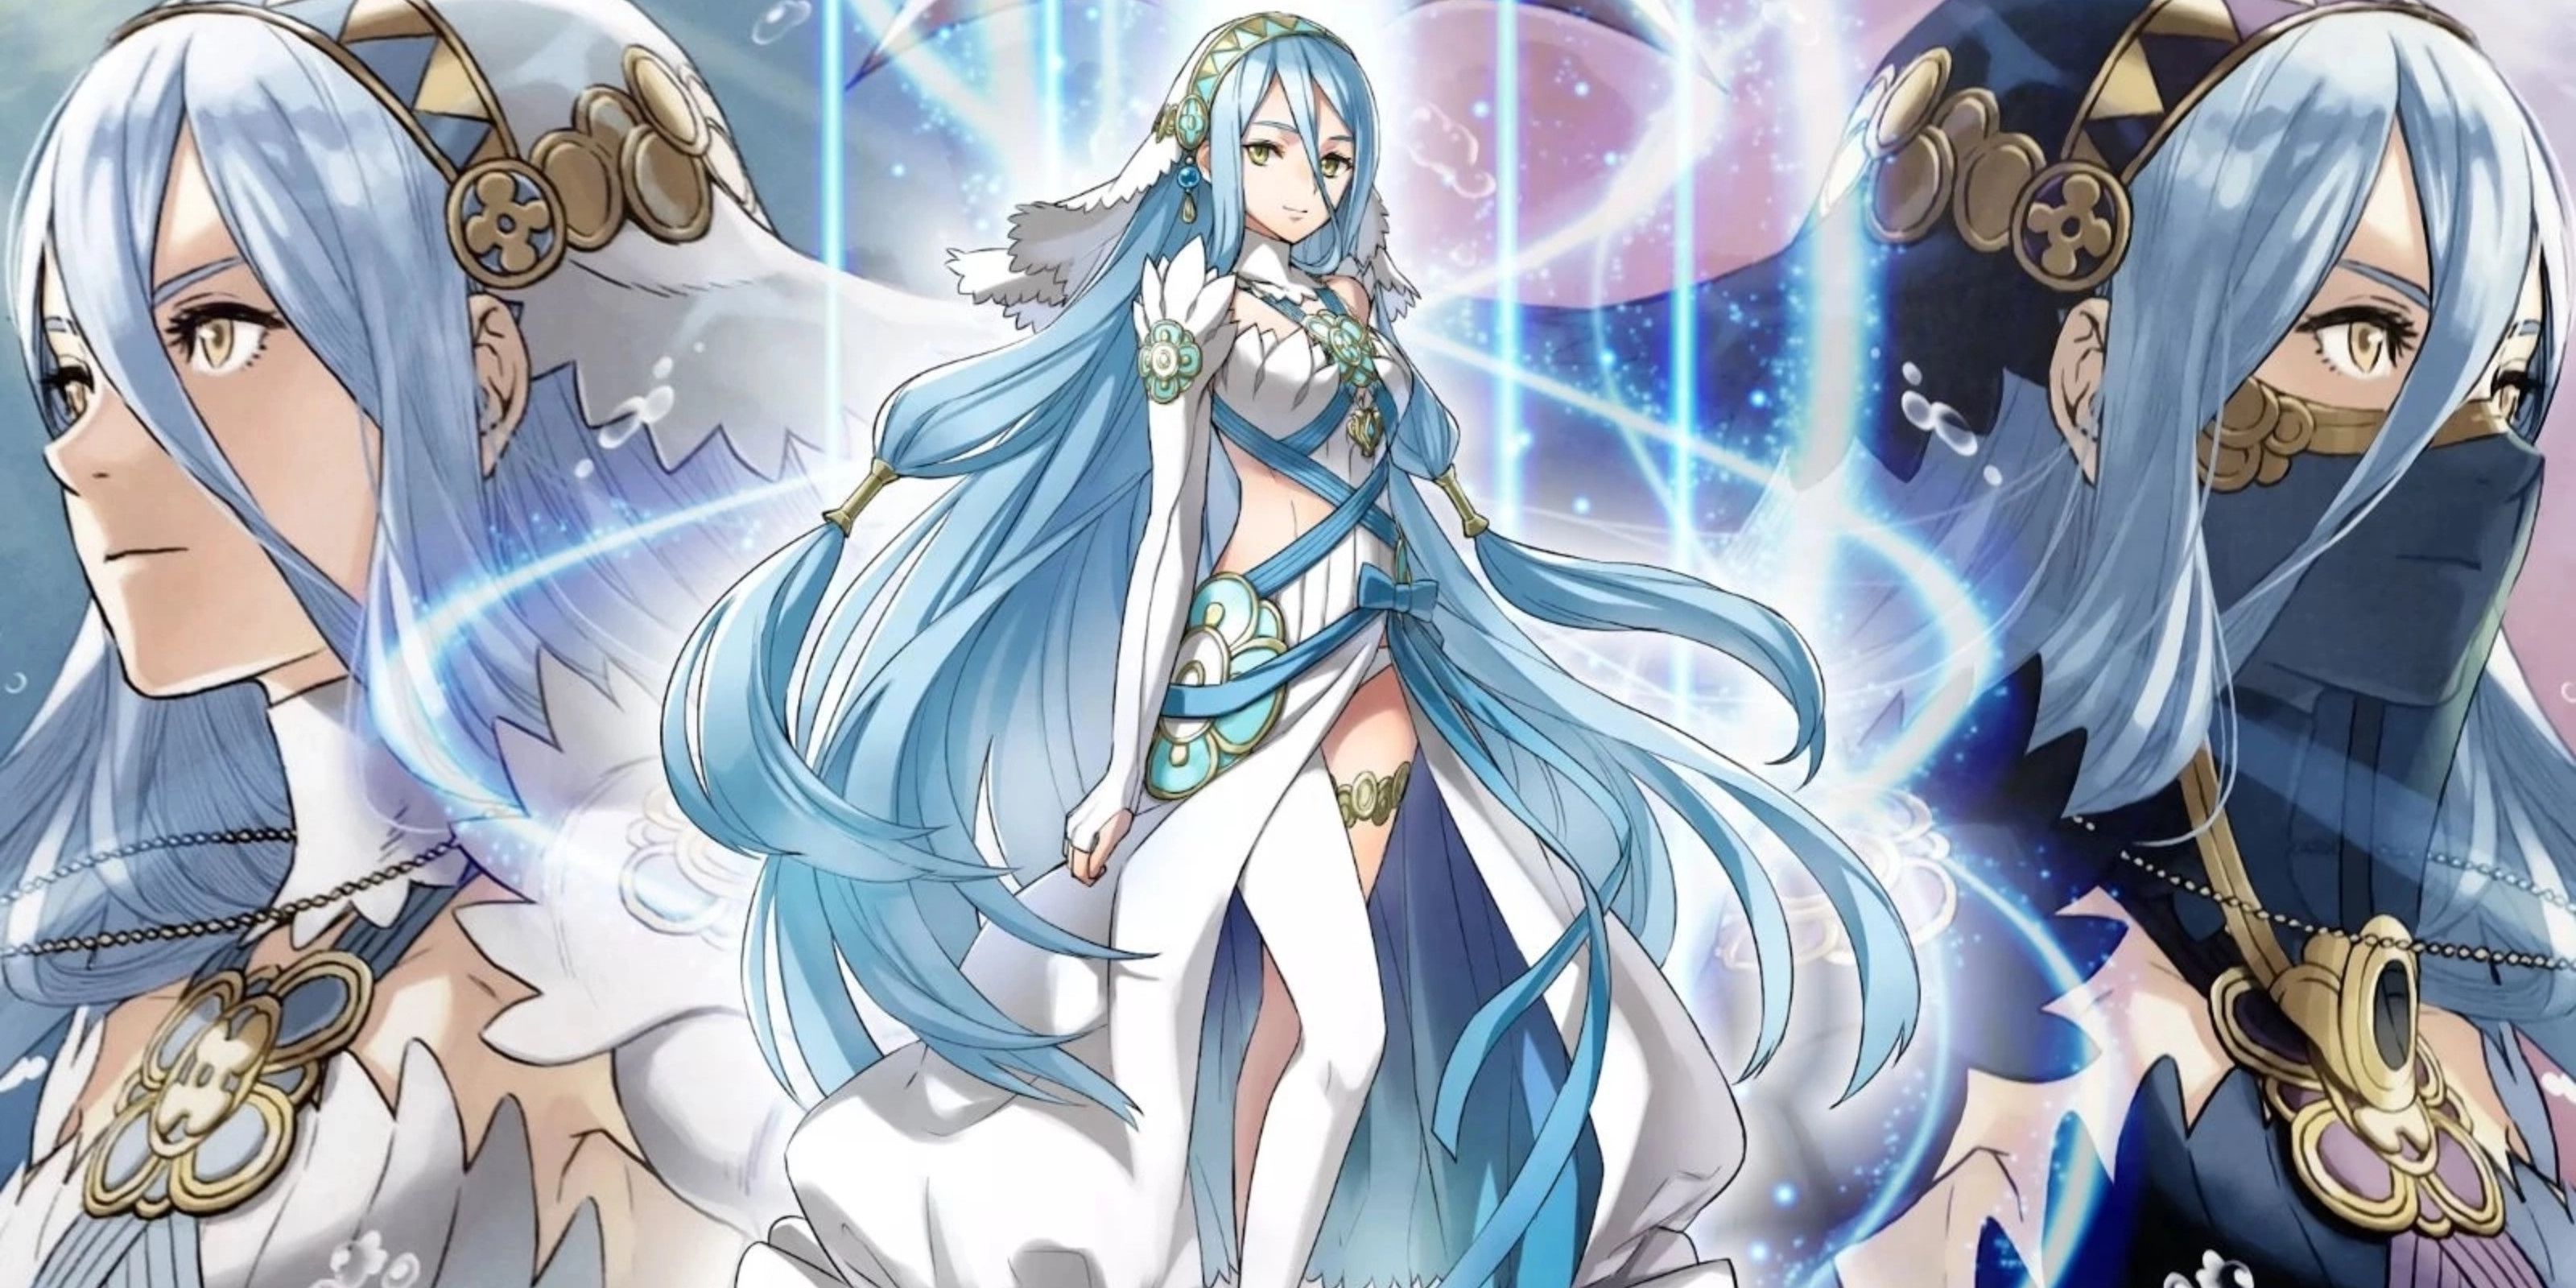 Azura in both her Birthright and Conquest performance attire